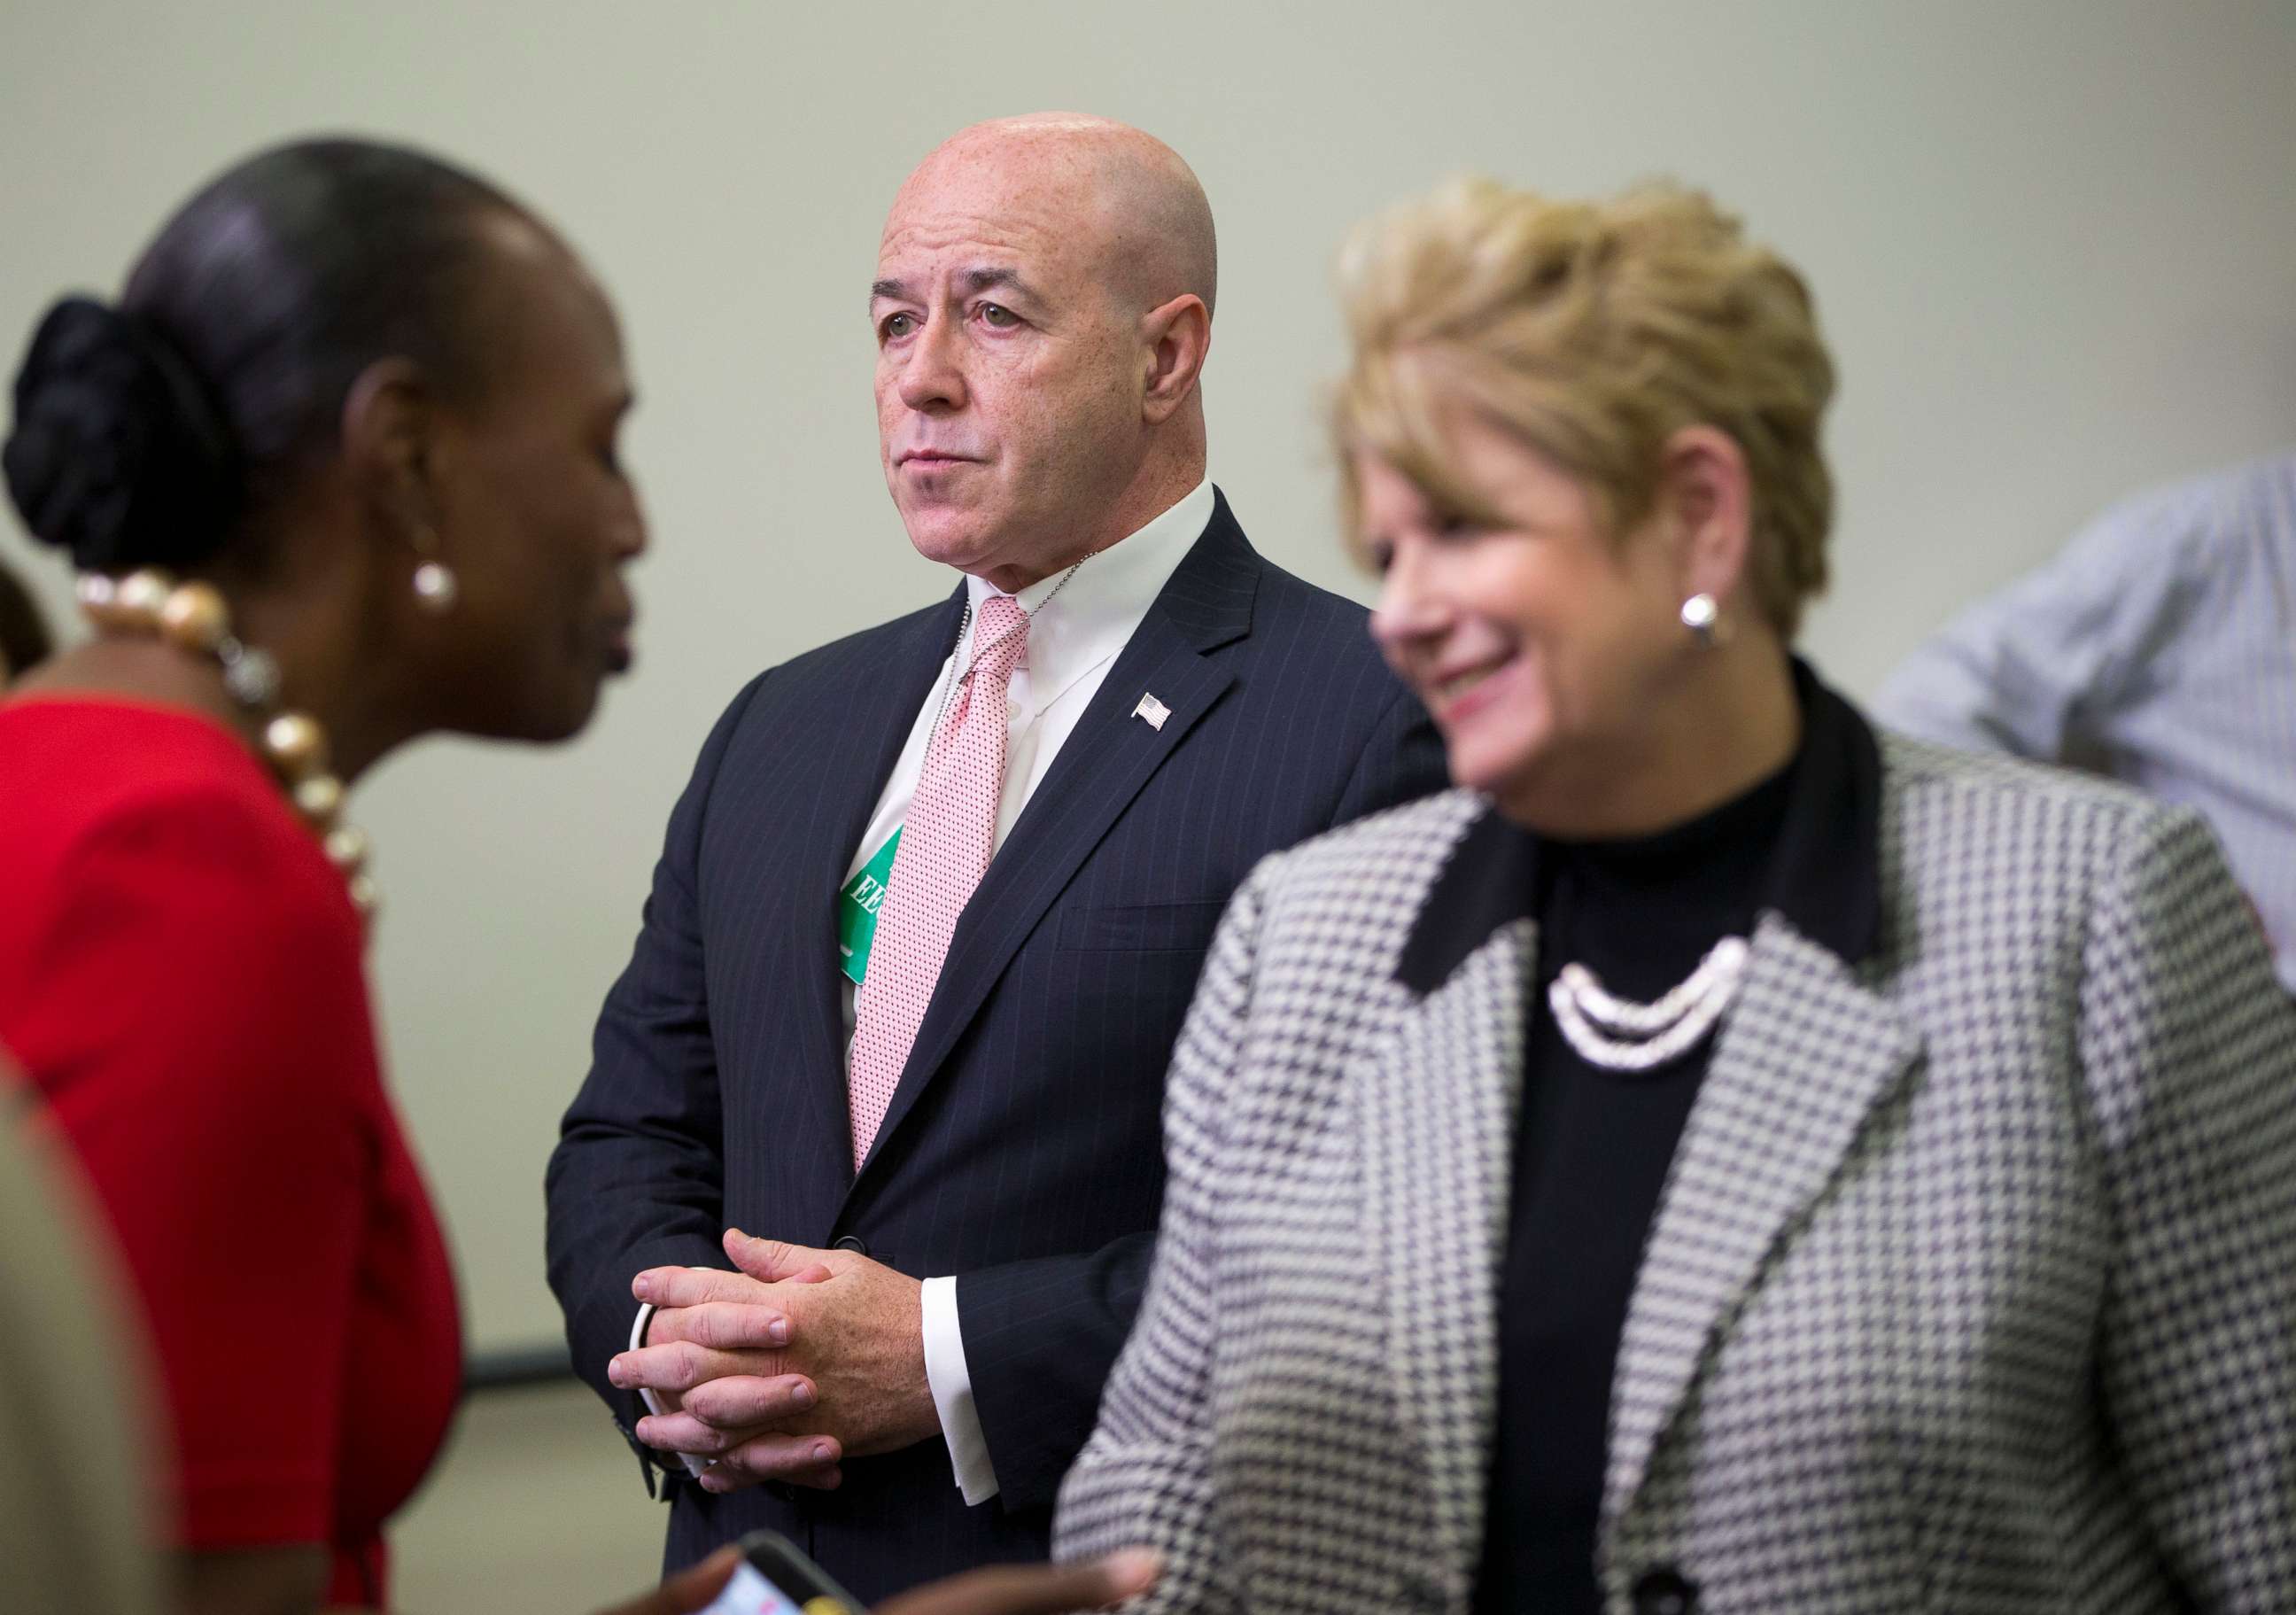 PHOTO: Former New York Police Commissioner Bernie Kerik attends a forum on criminal justice reform on the White House complex in Washington, Oct. 22, 2015.